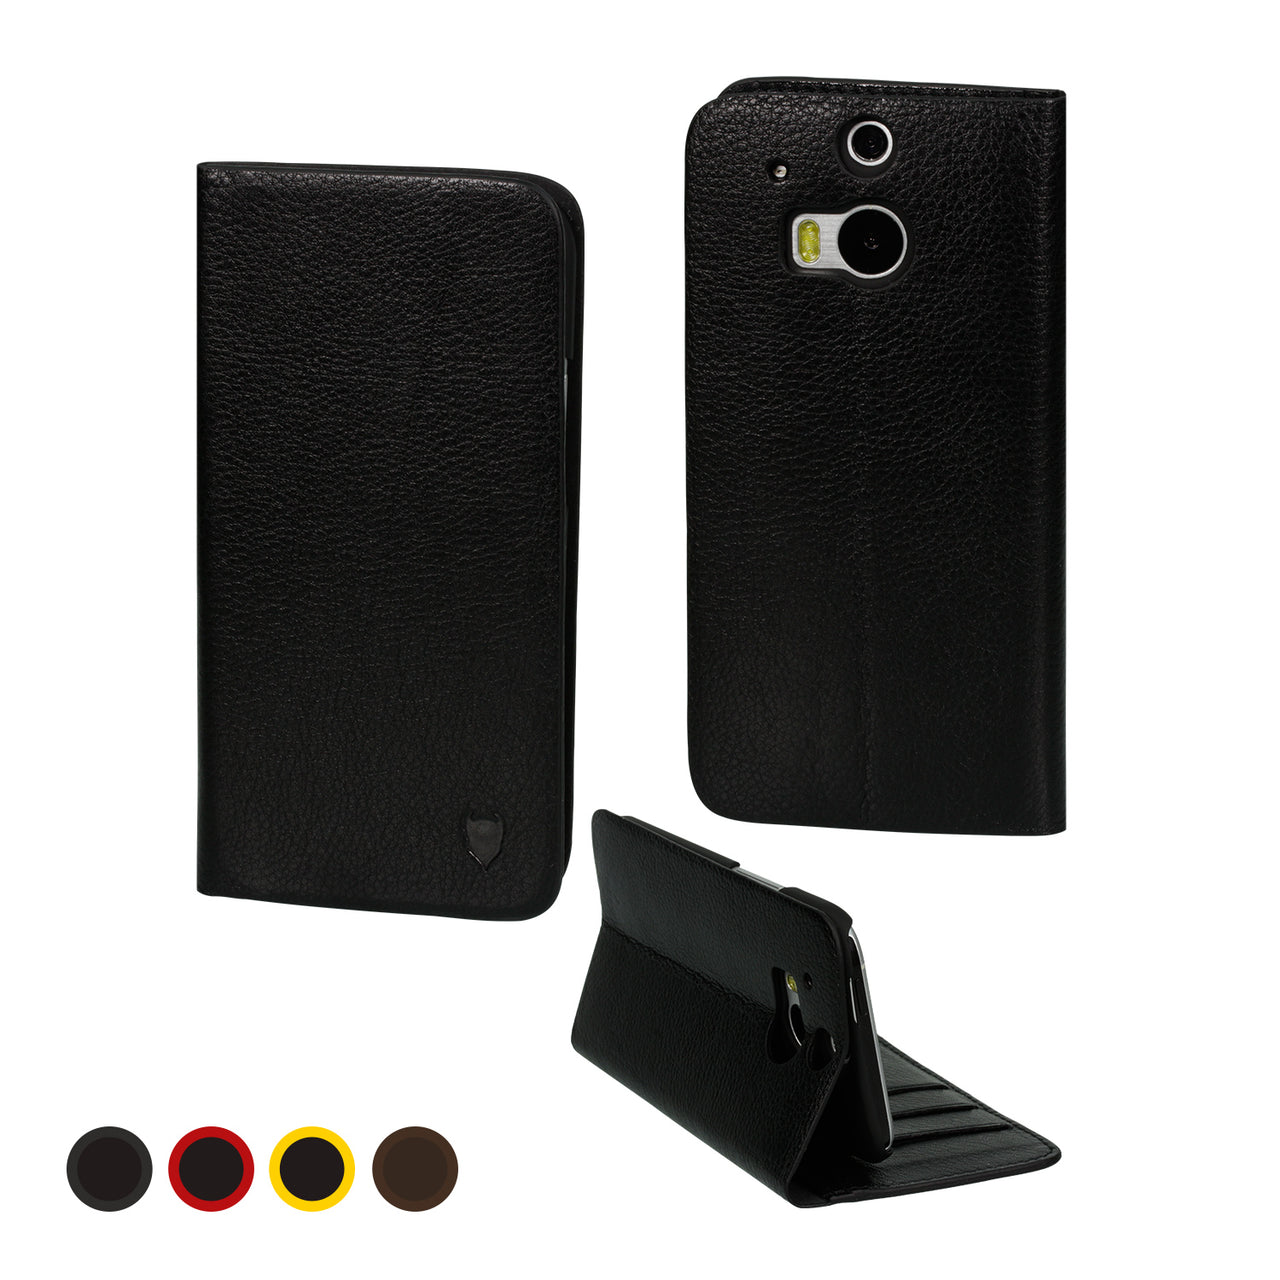 HTC One 2014 (M8) Genuine Leather Case with Stand | Artisancover